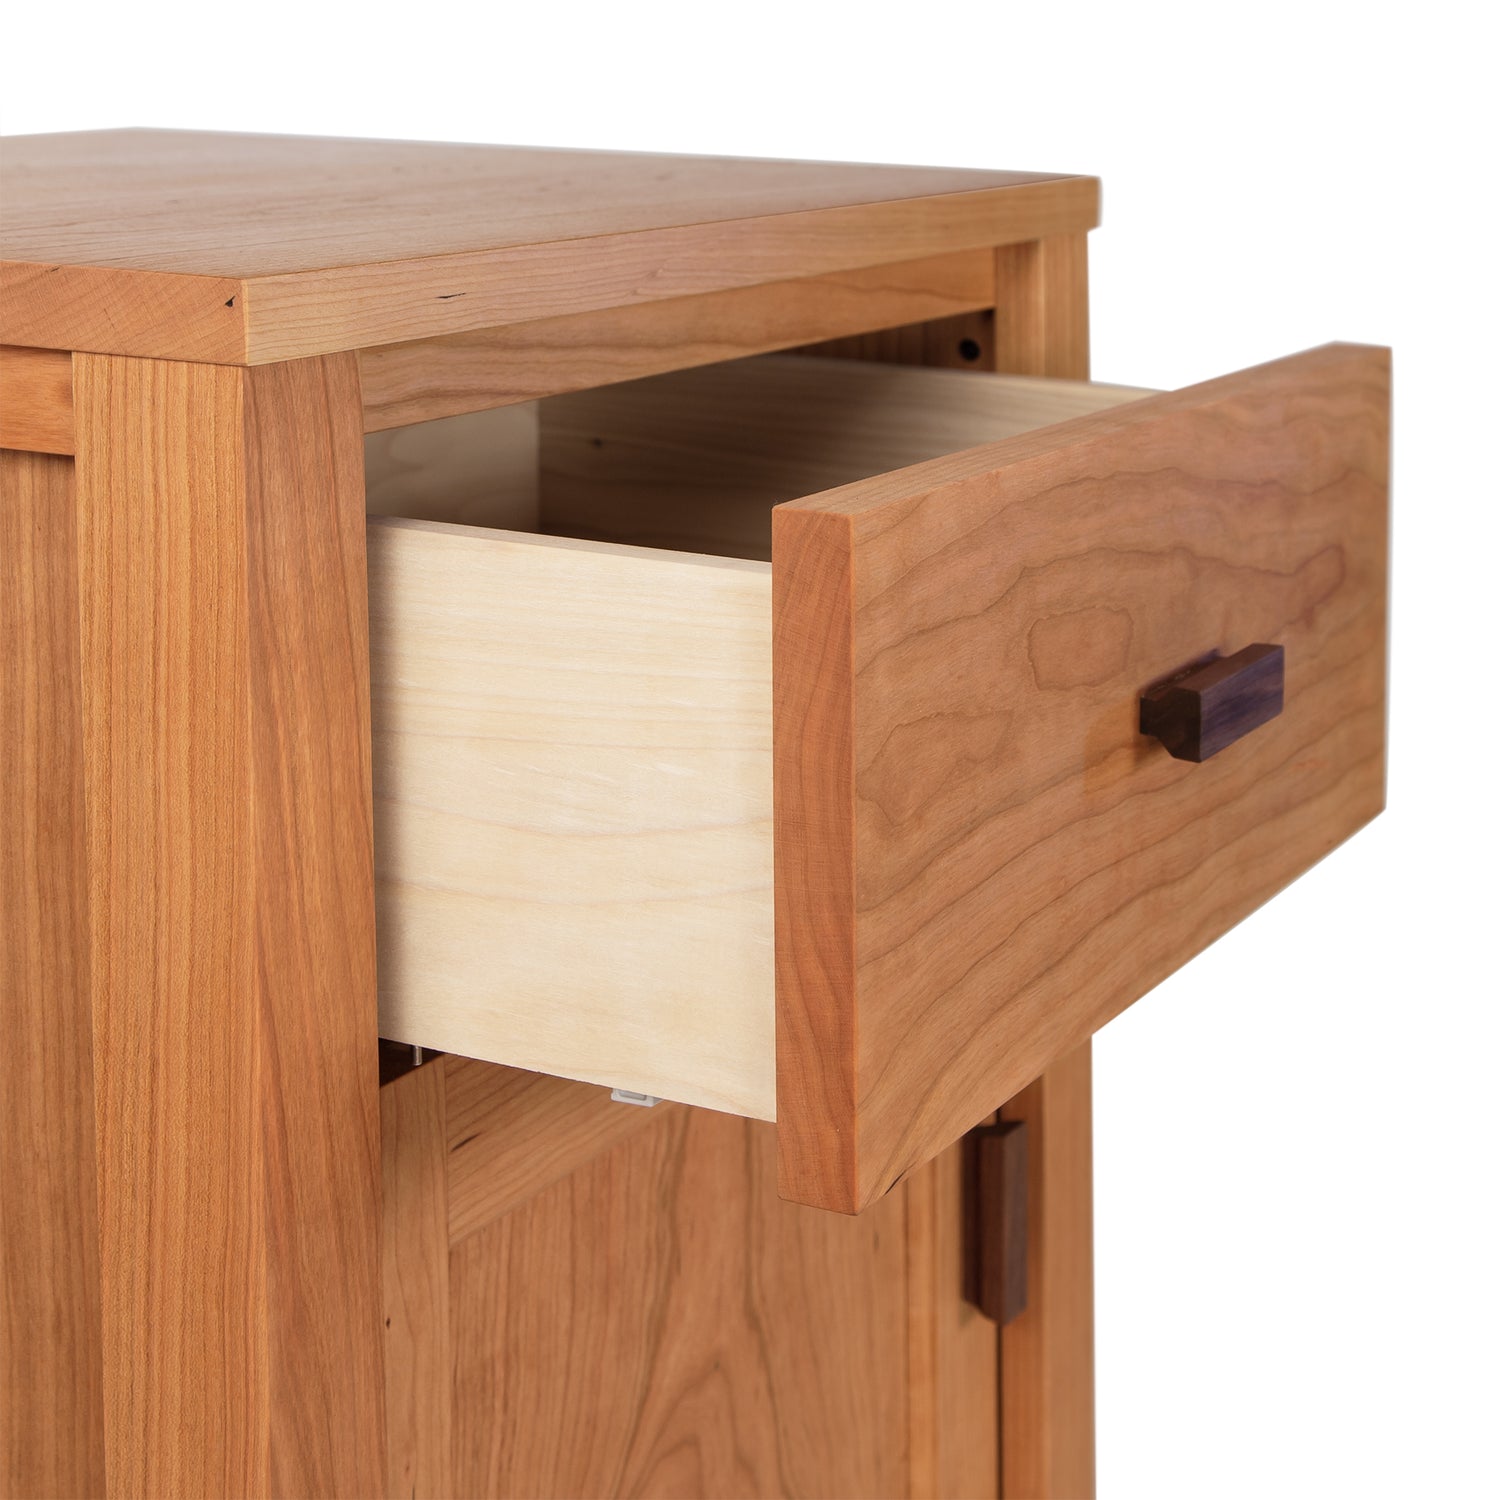 Introducing the Maple Corner Woodworks Andover Modern 1-Drawer Nightstand with Door, handcrafted by Vermont woodworkers using sustainably sourced hardwoods. This wooden nightstand boasts a single drawer for convenient storage.